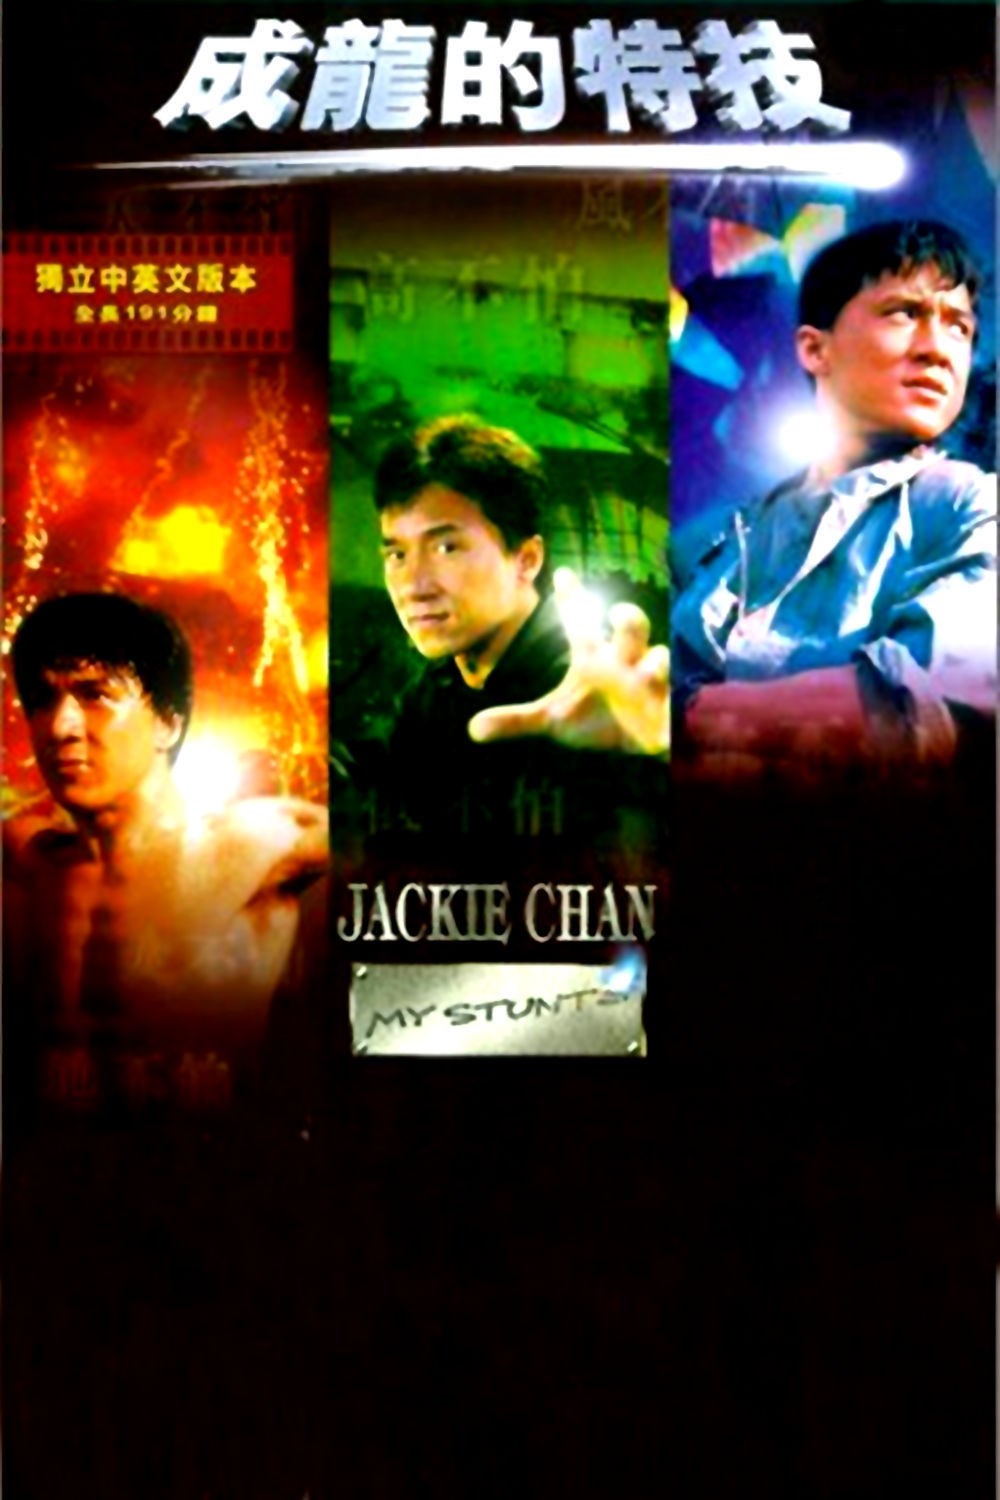 download film jackie chan sub indonesia